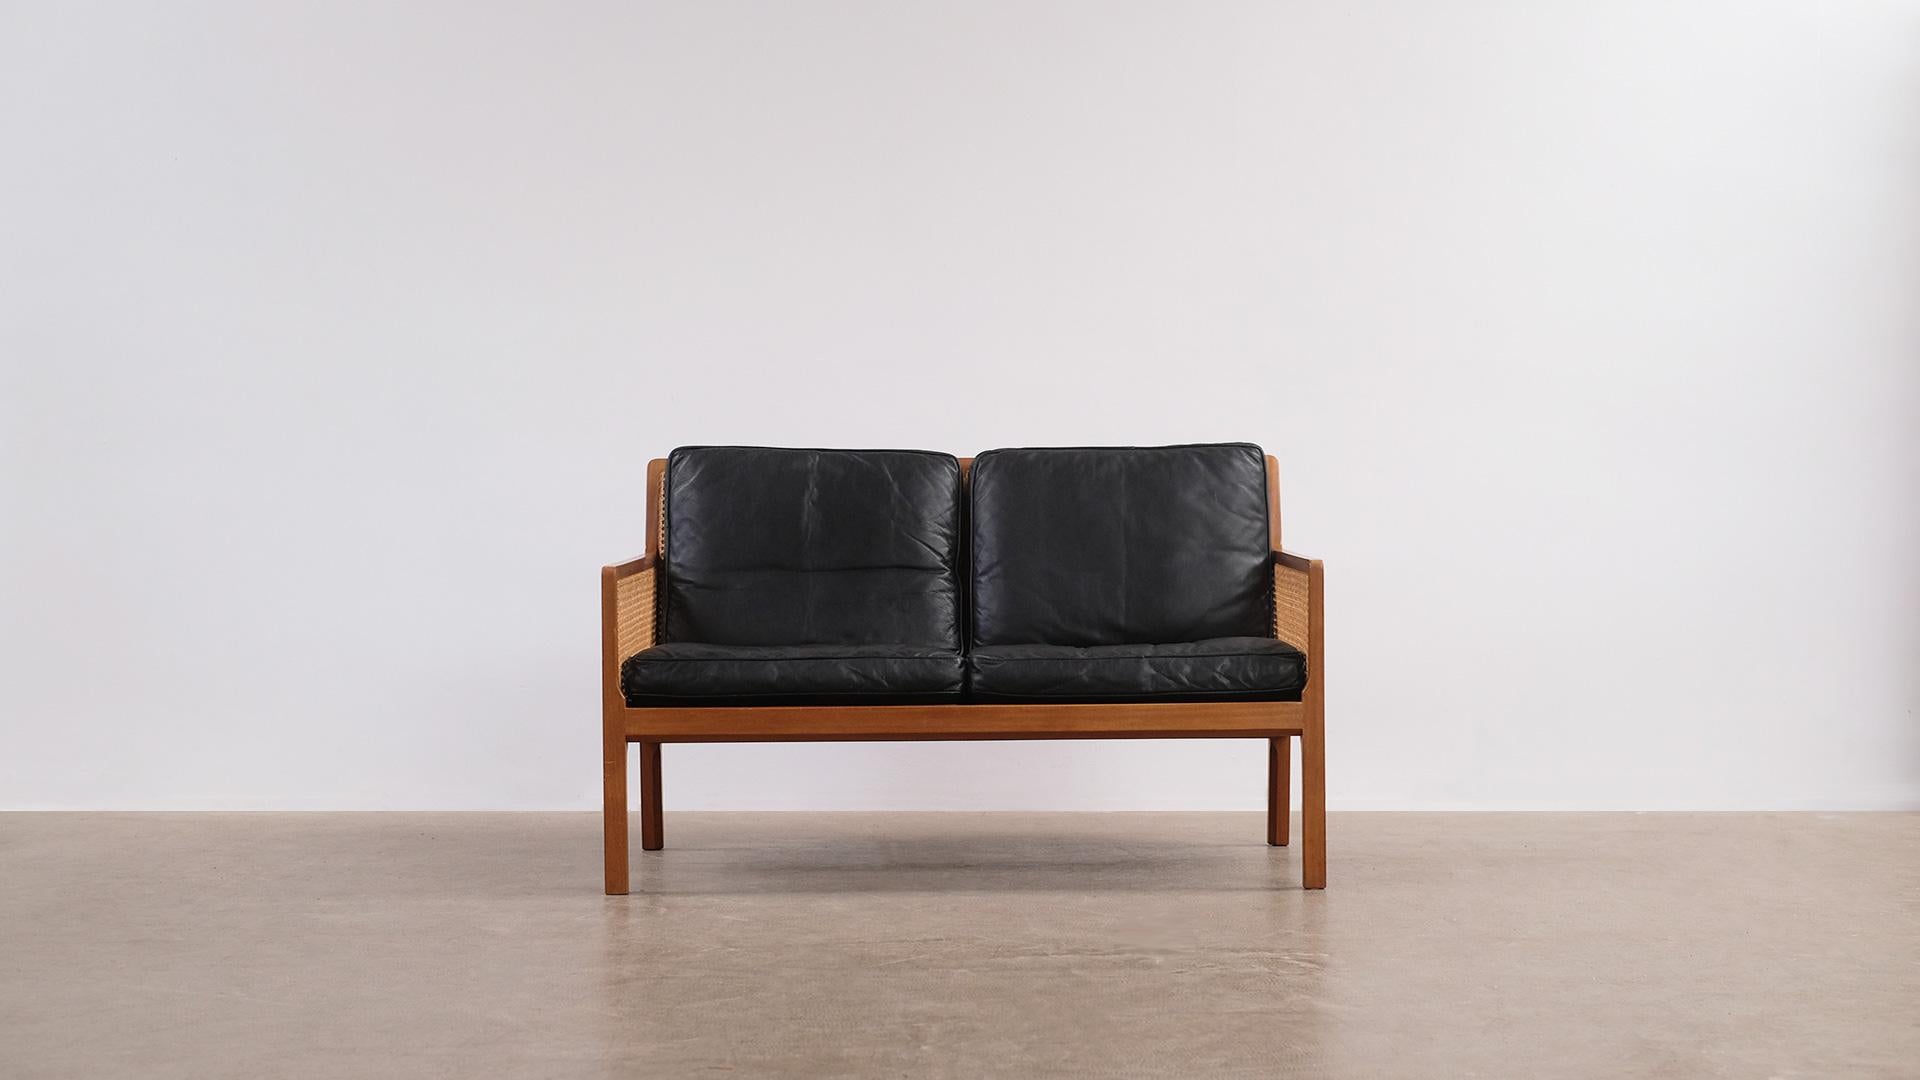 Wonderful sofa in solid mahogany, French cane and leather designed by Bernt Petersen for master cabinet maker Wørts møbelsnedkeri, Denmark. Fantastic craftsmanship, super elegant, simple and Classic design. Buttery soft original leather cushions.